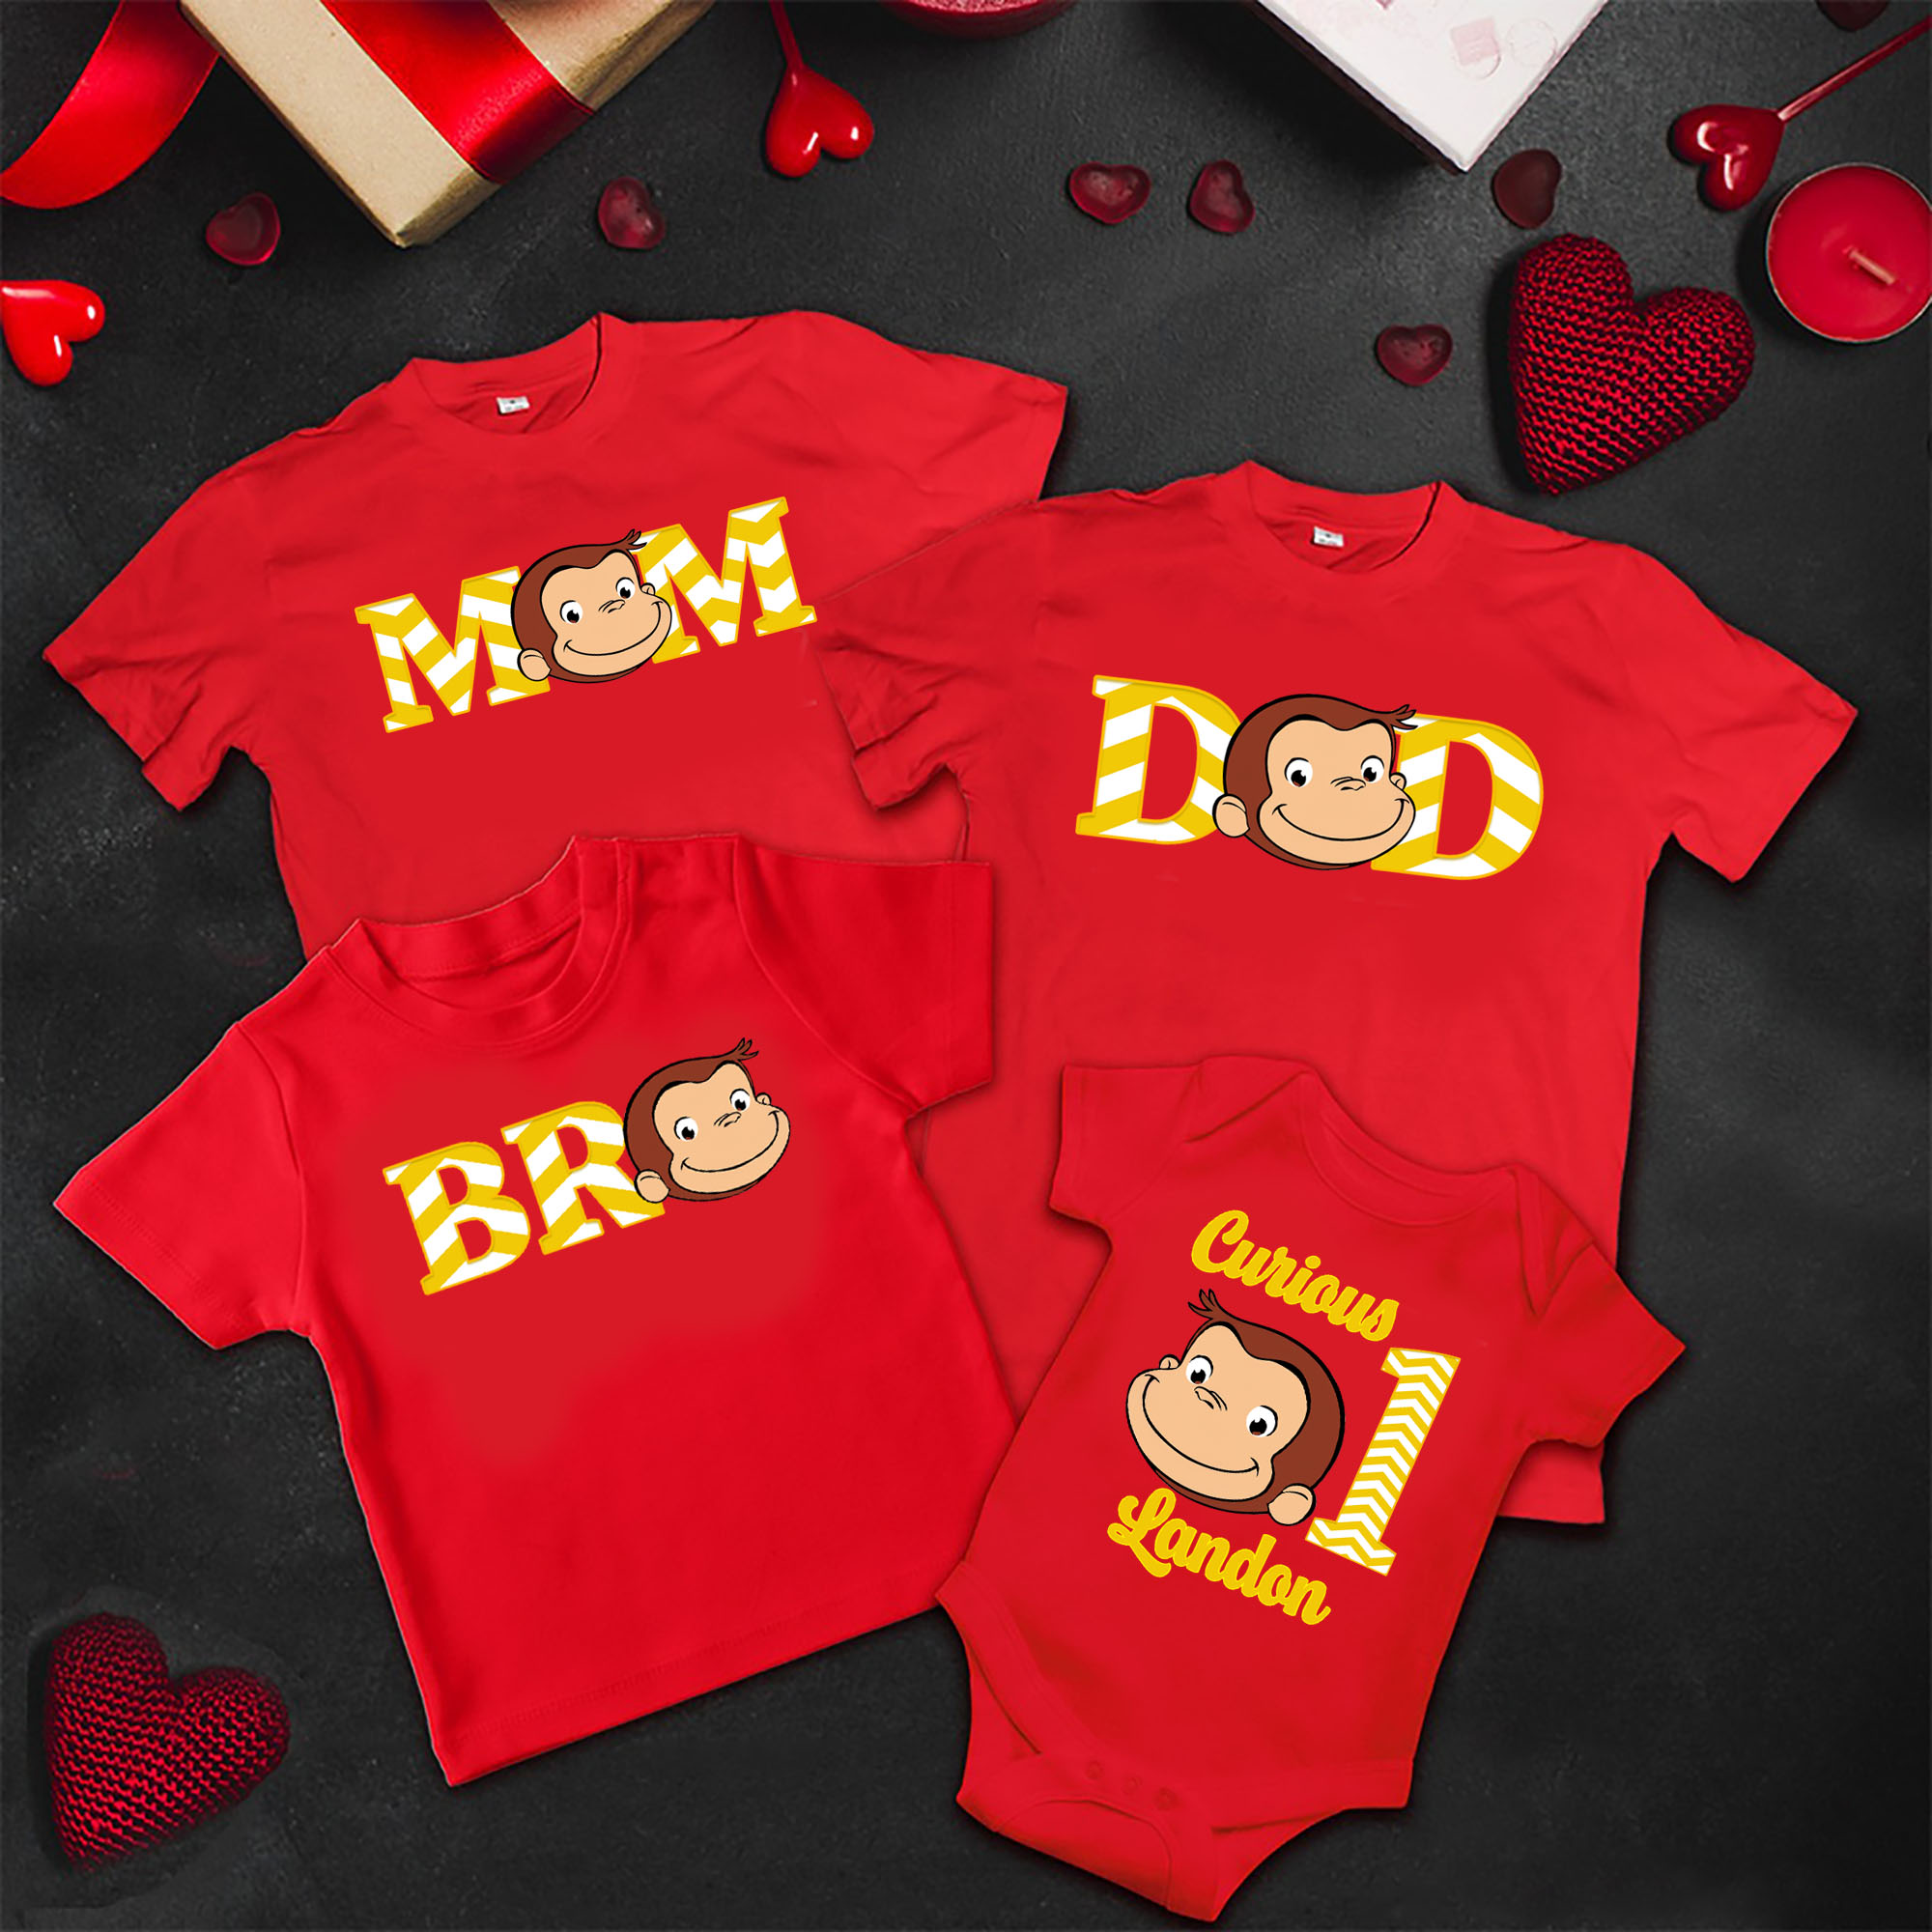 Personalized Curious George Birthday Shirt, Personalized Name and Age Customized Curious George Shirts, Family Tee